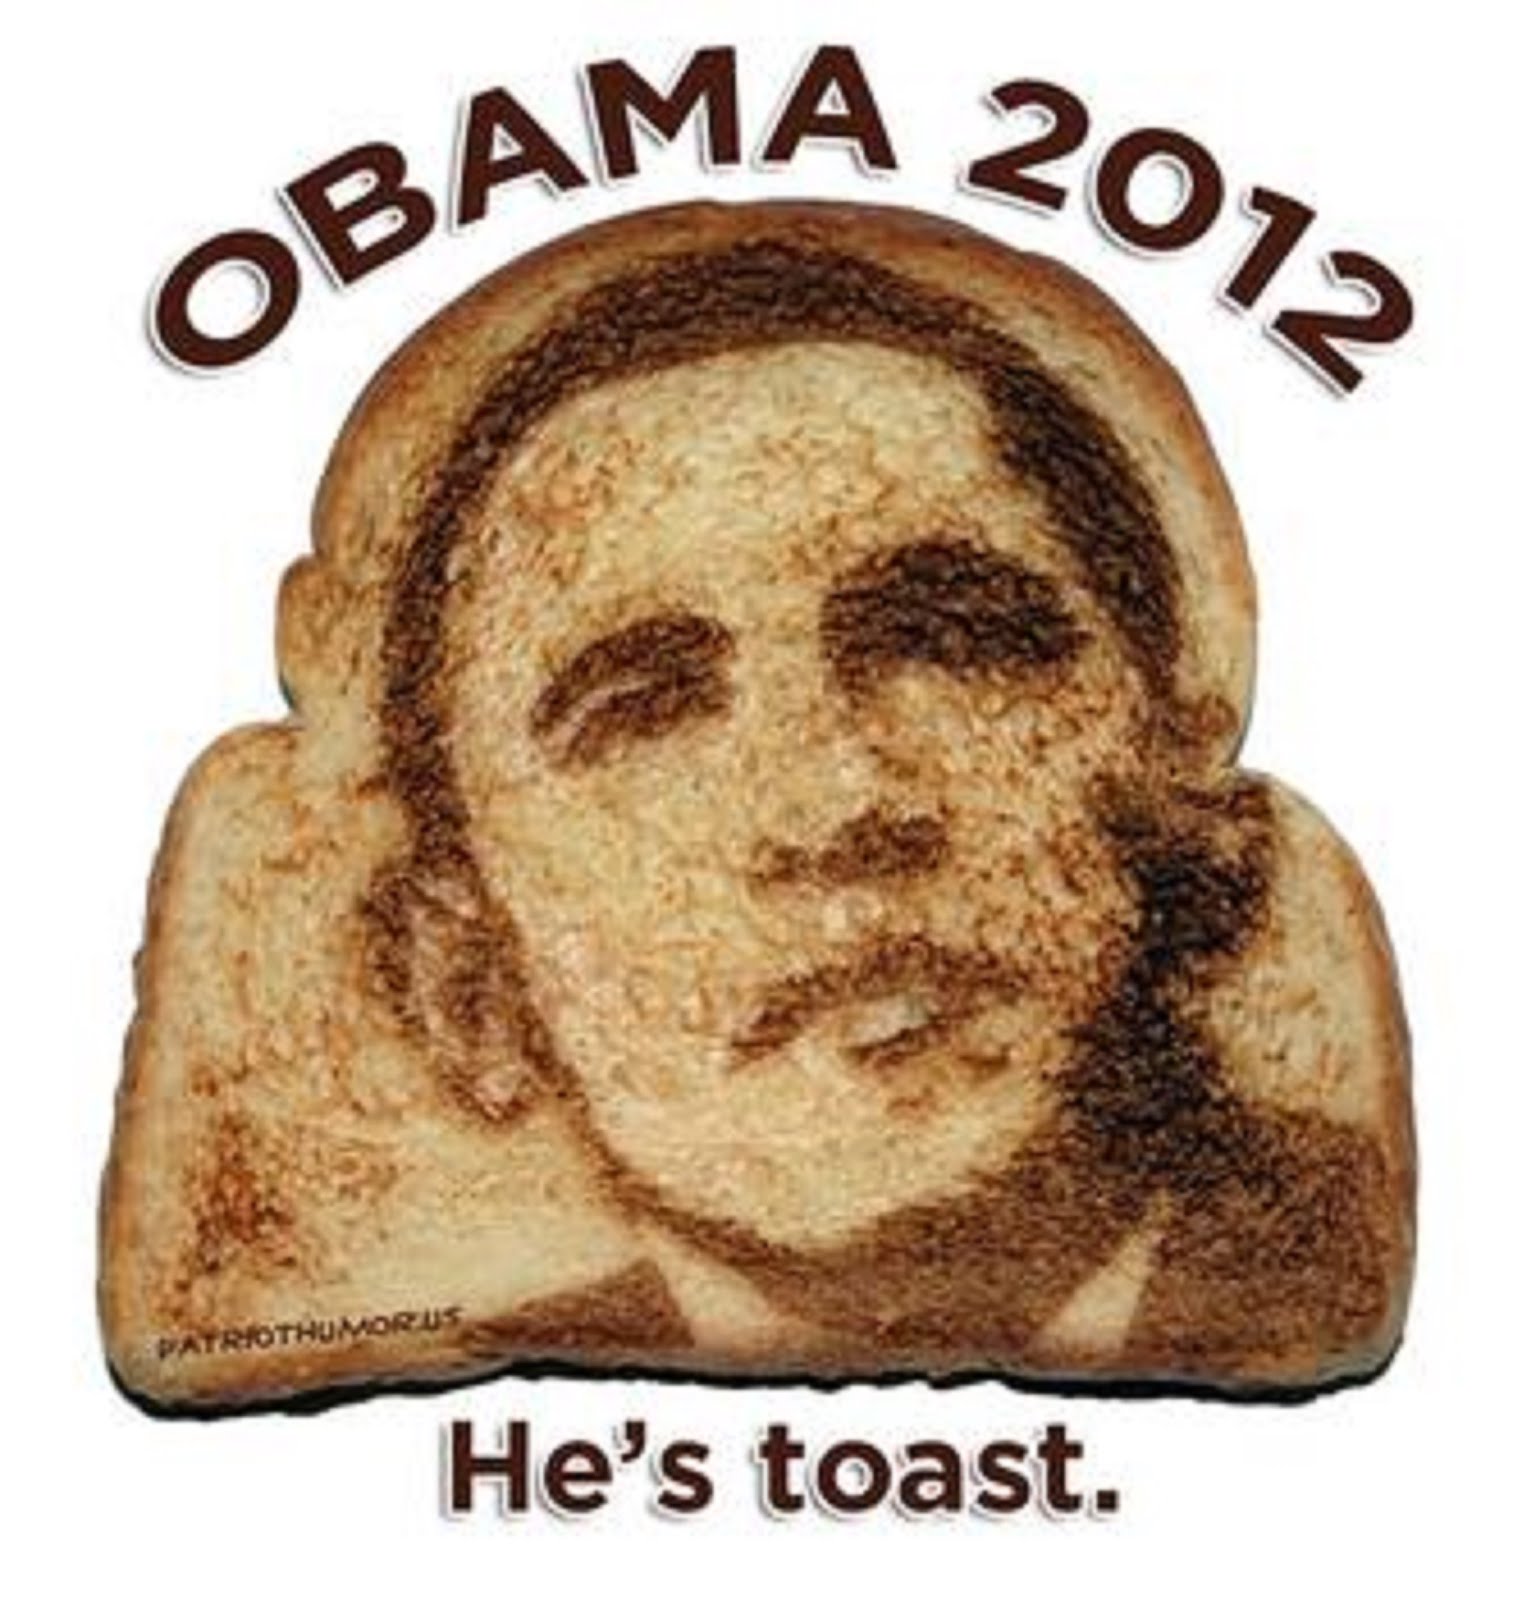 OBAMA IS TOAST NO MATTER WHAT THE YEAR